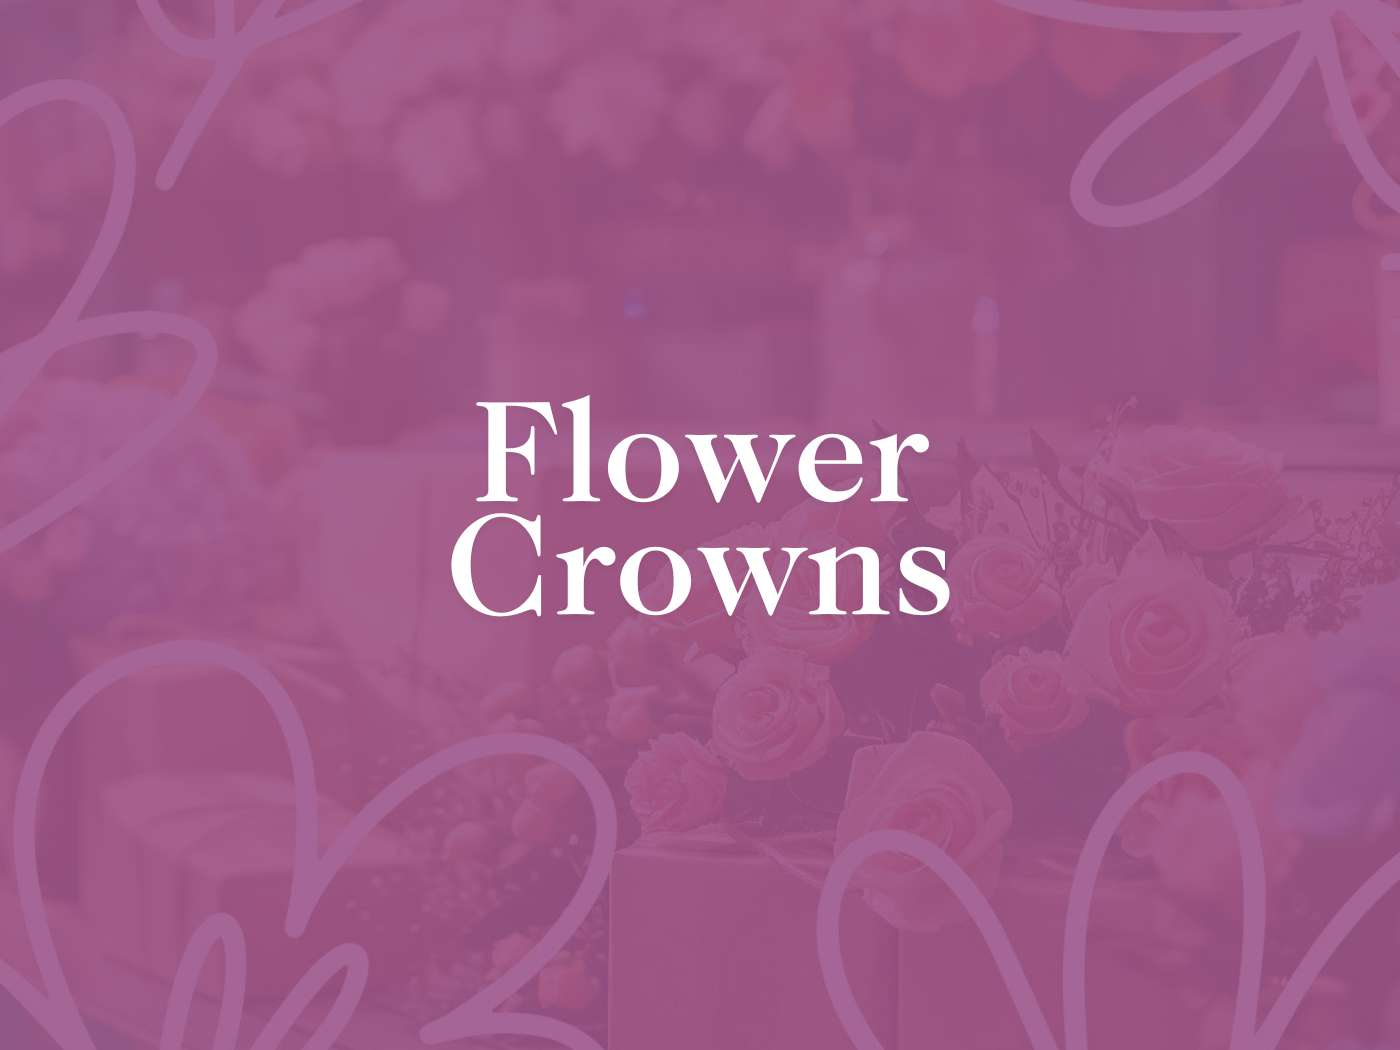 Soft-focus image with floral motifs and the words 'Flower Crowns' prominently displayed, suggesting a collection of floral headwear available at Fabulous Flowers and Gifts.